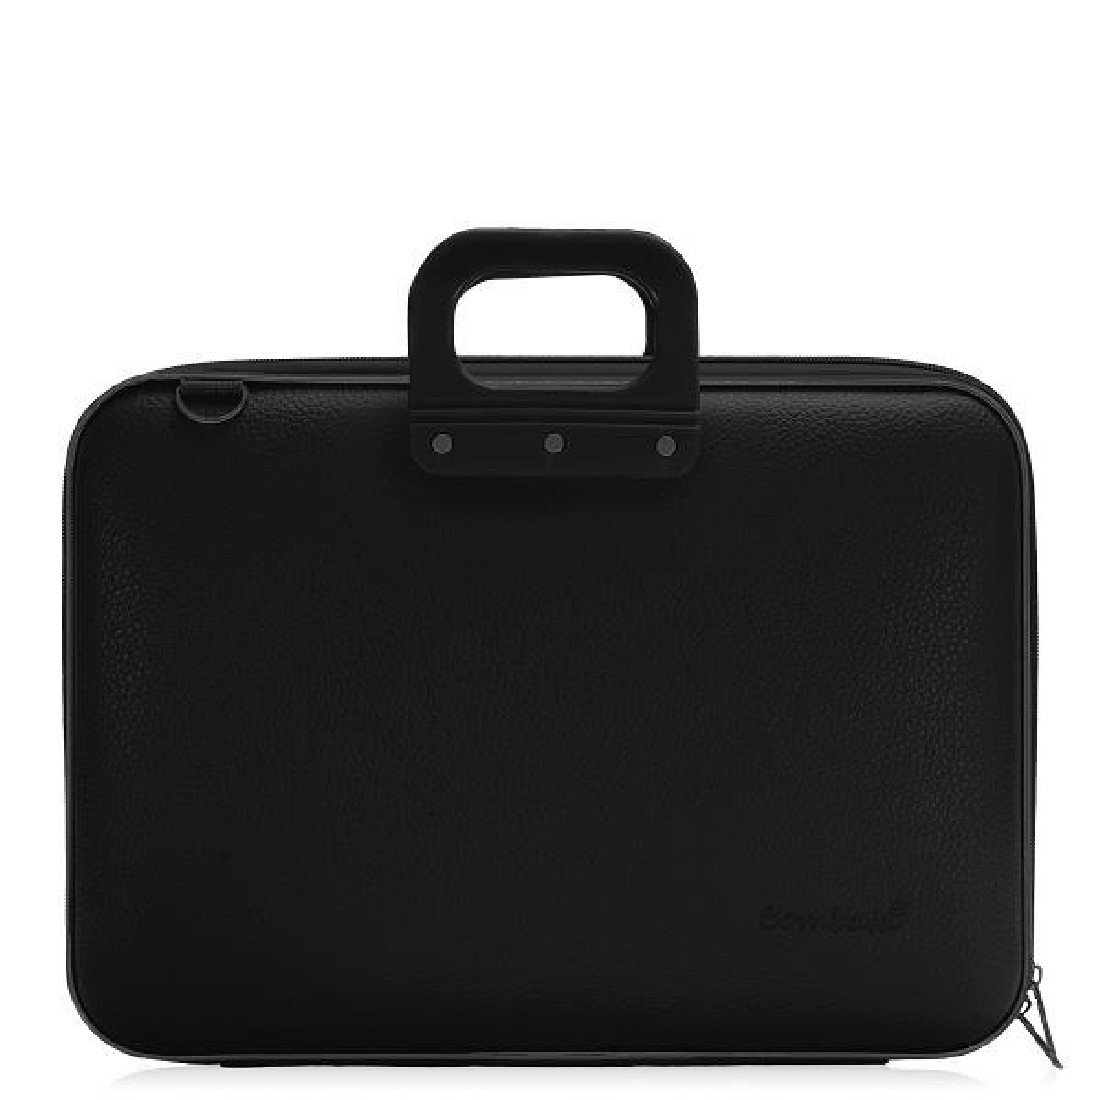 BRIEFCASE LAPTOP UP TO 17 ALL BLACK MAXI BOMBATΑ